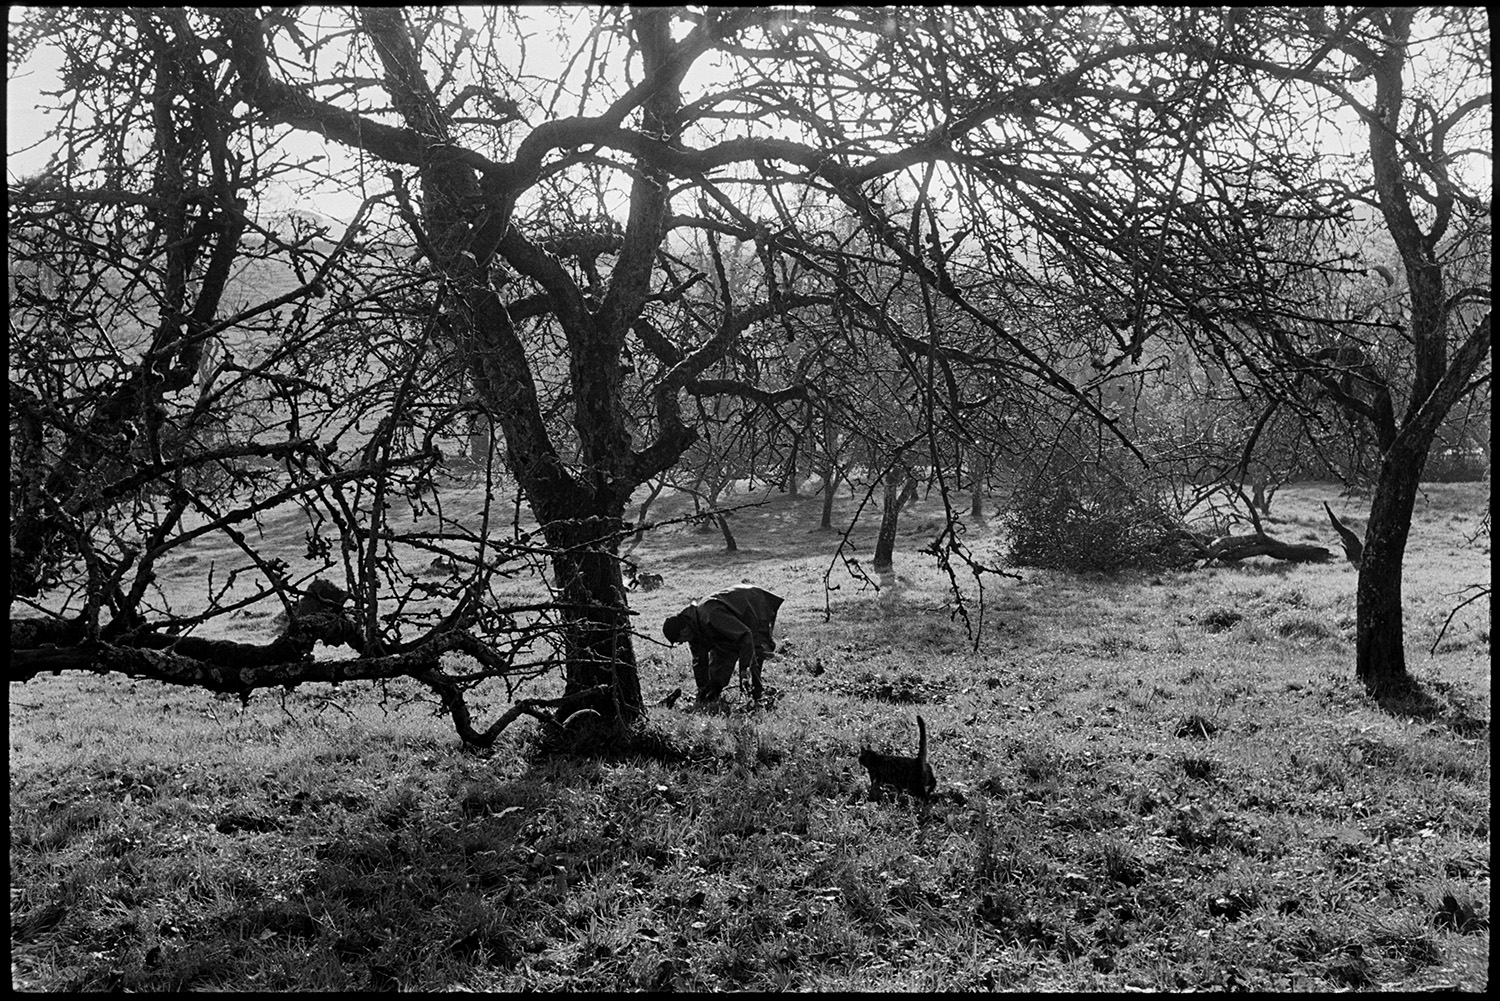 Cider orchard, man picking up apples and bagging them up.
[A man picking up apples in a cider orchard at Westpark, Iddesleigh. There is a fallen tree in the background. A cat is walking through the grass.]